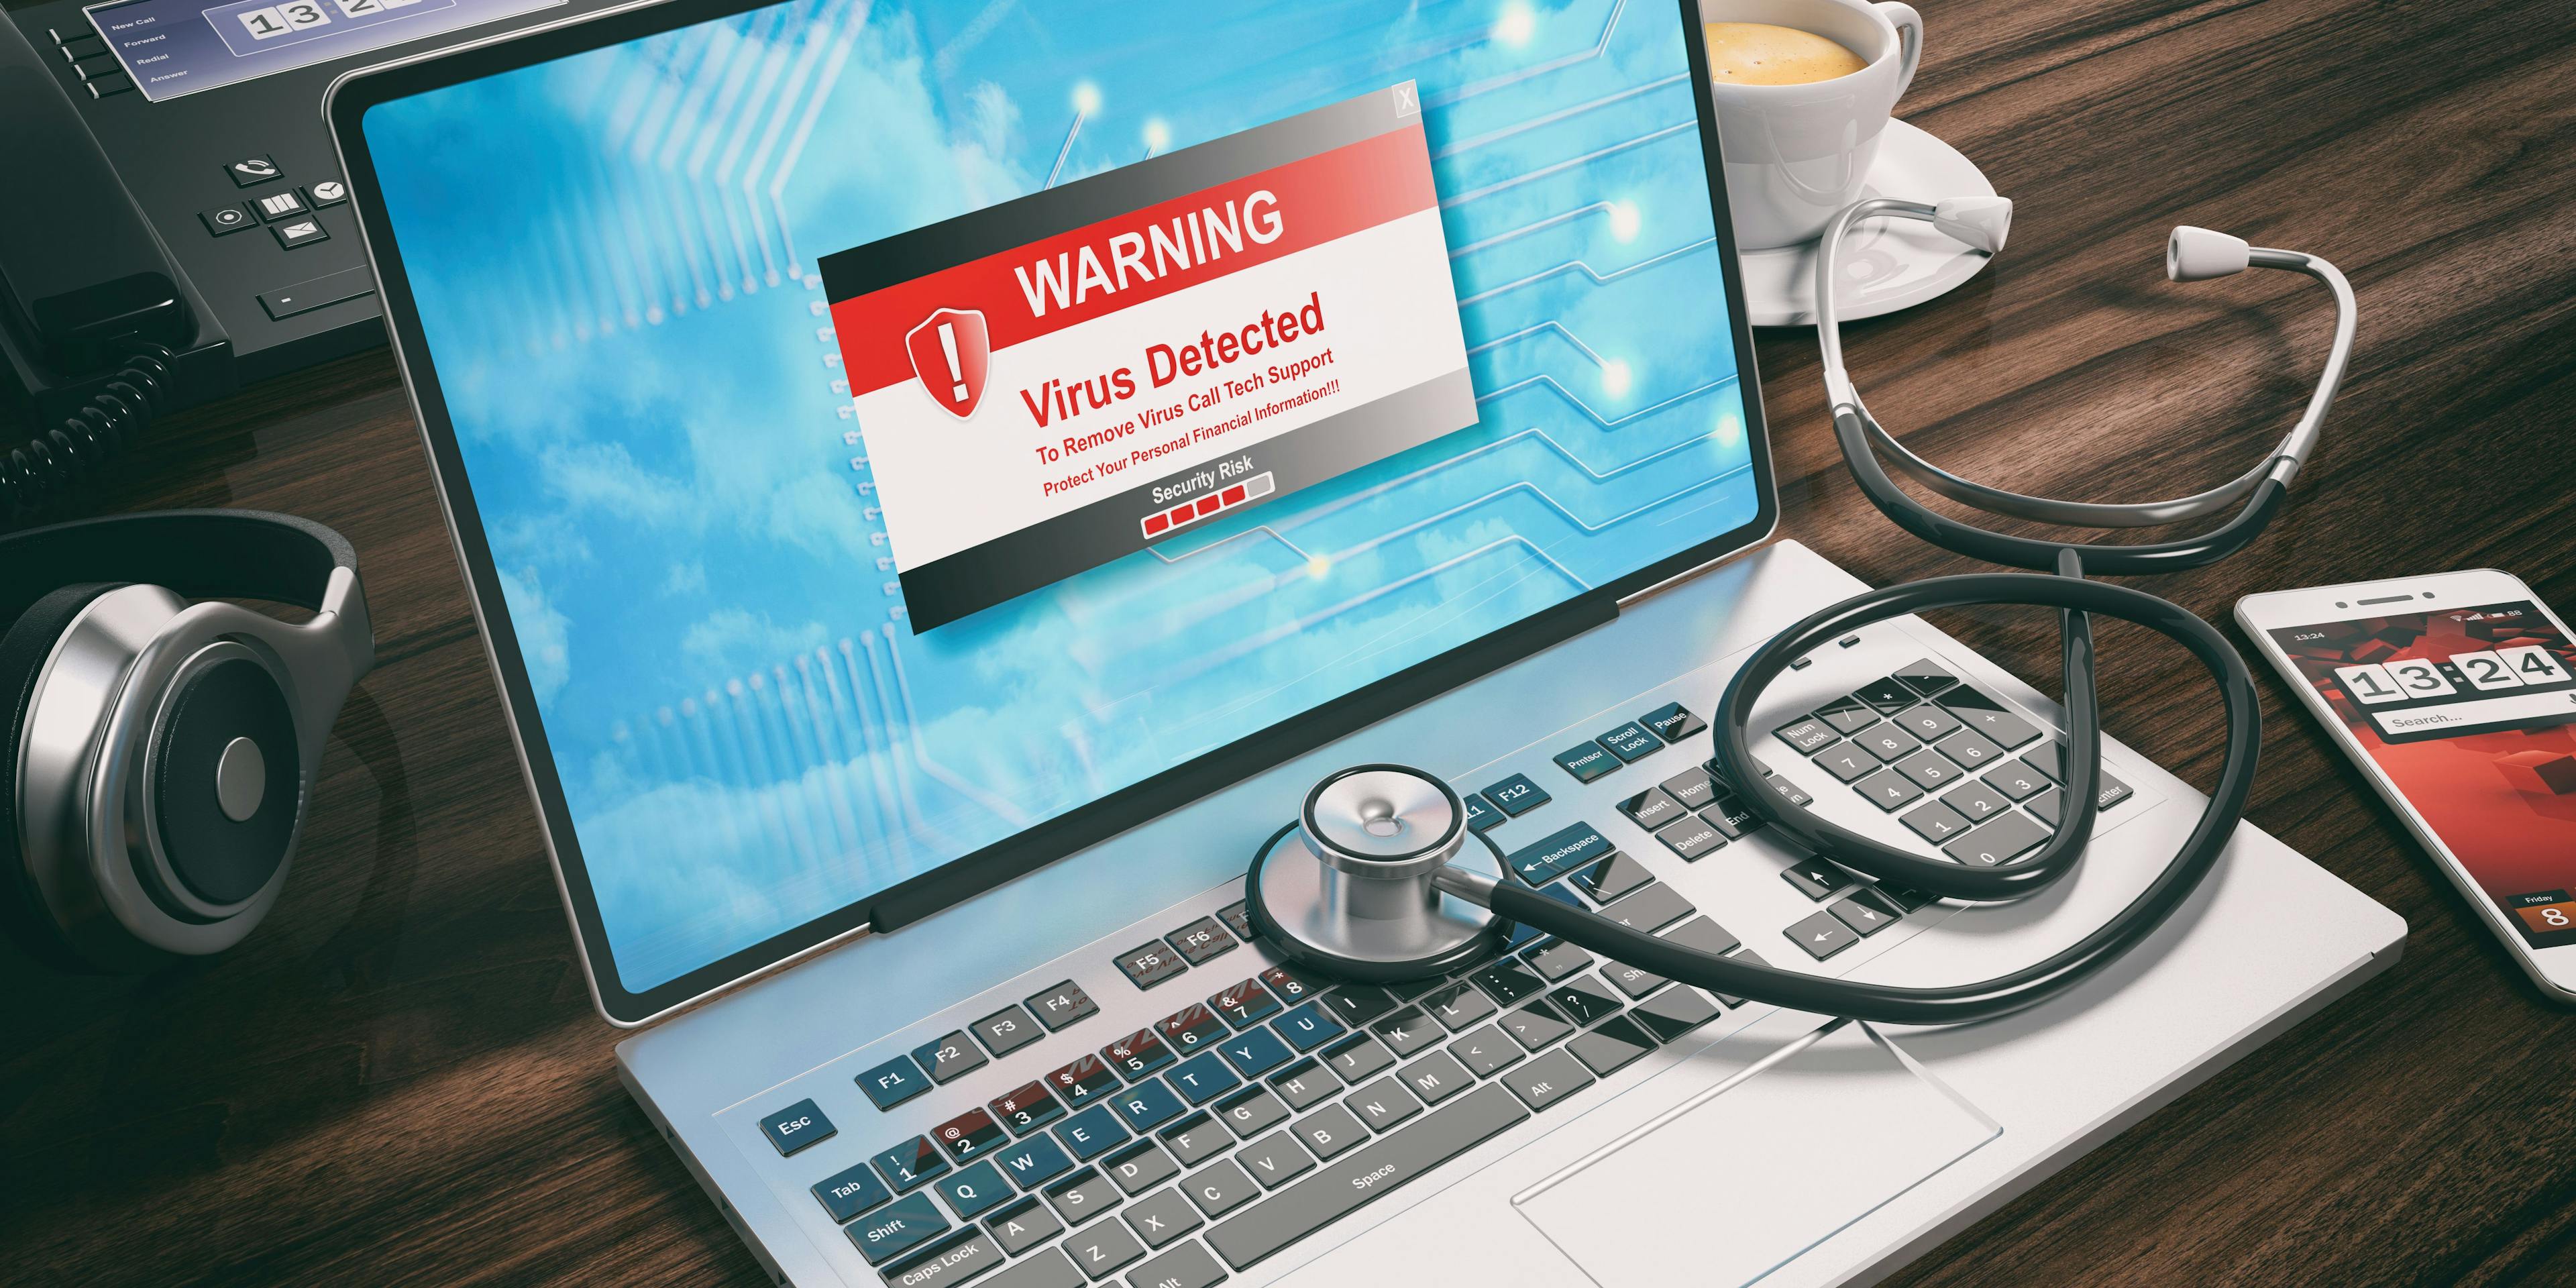 Why medical practices need to guard against cyberattacks